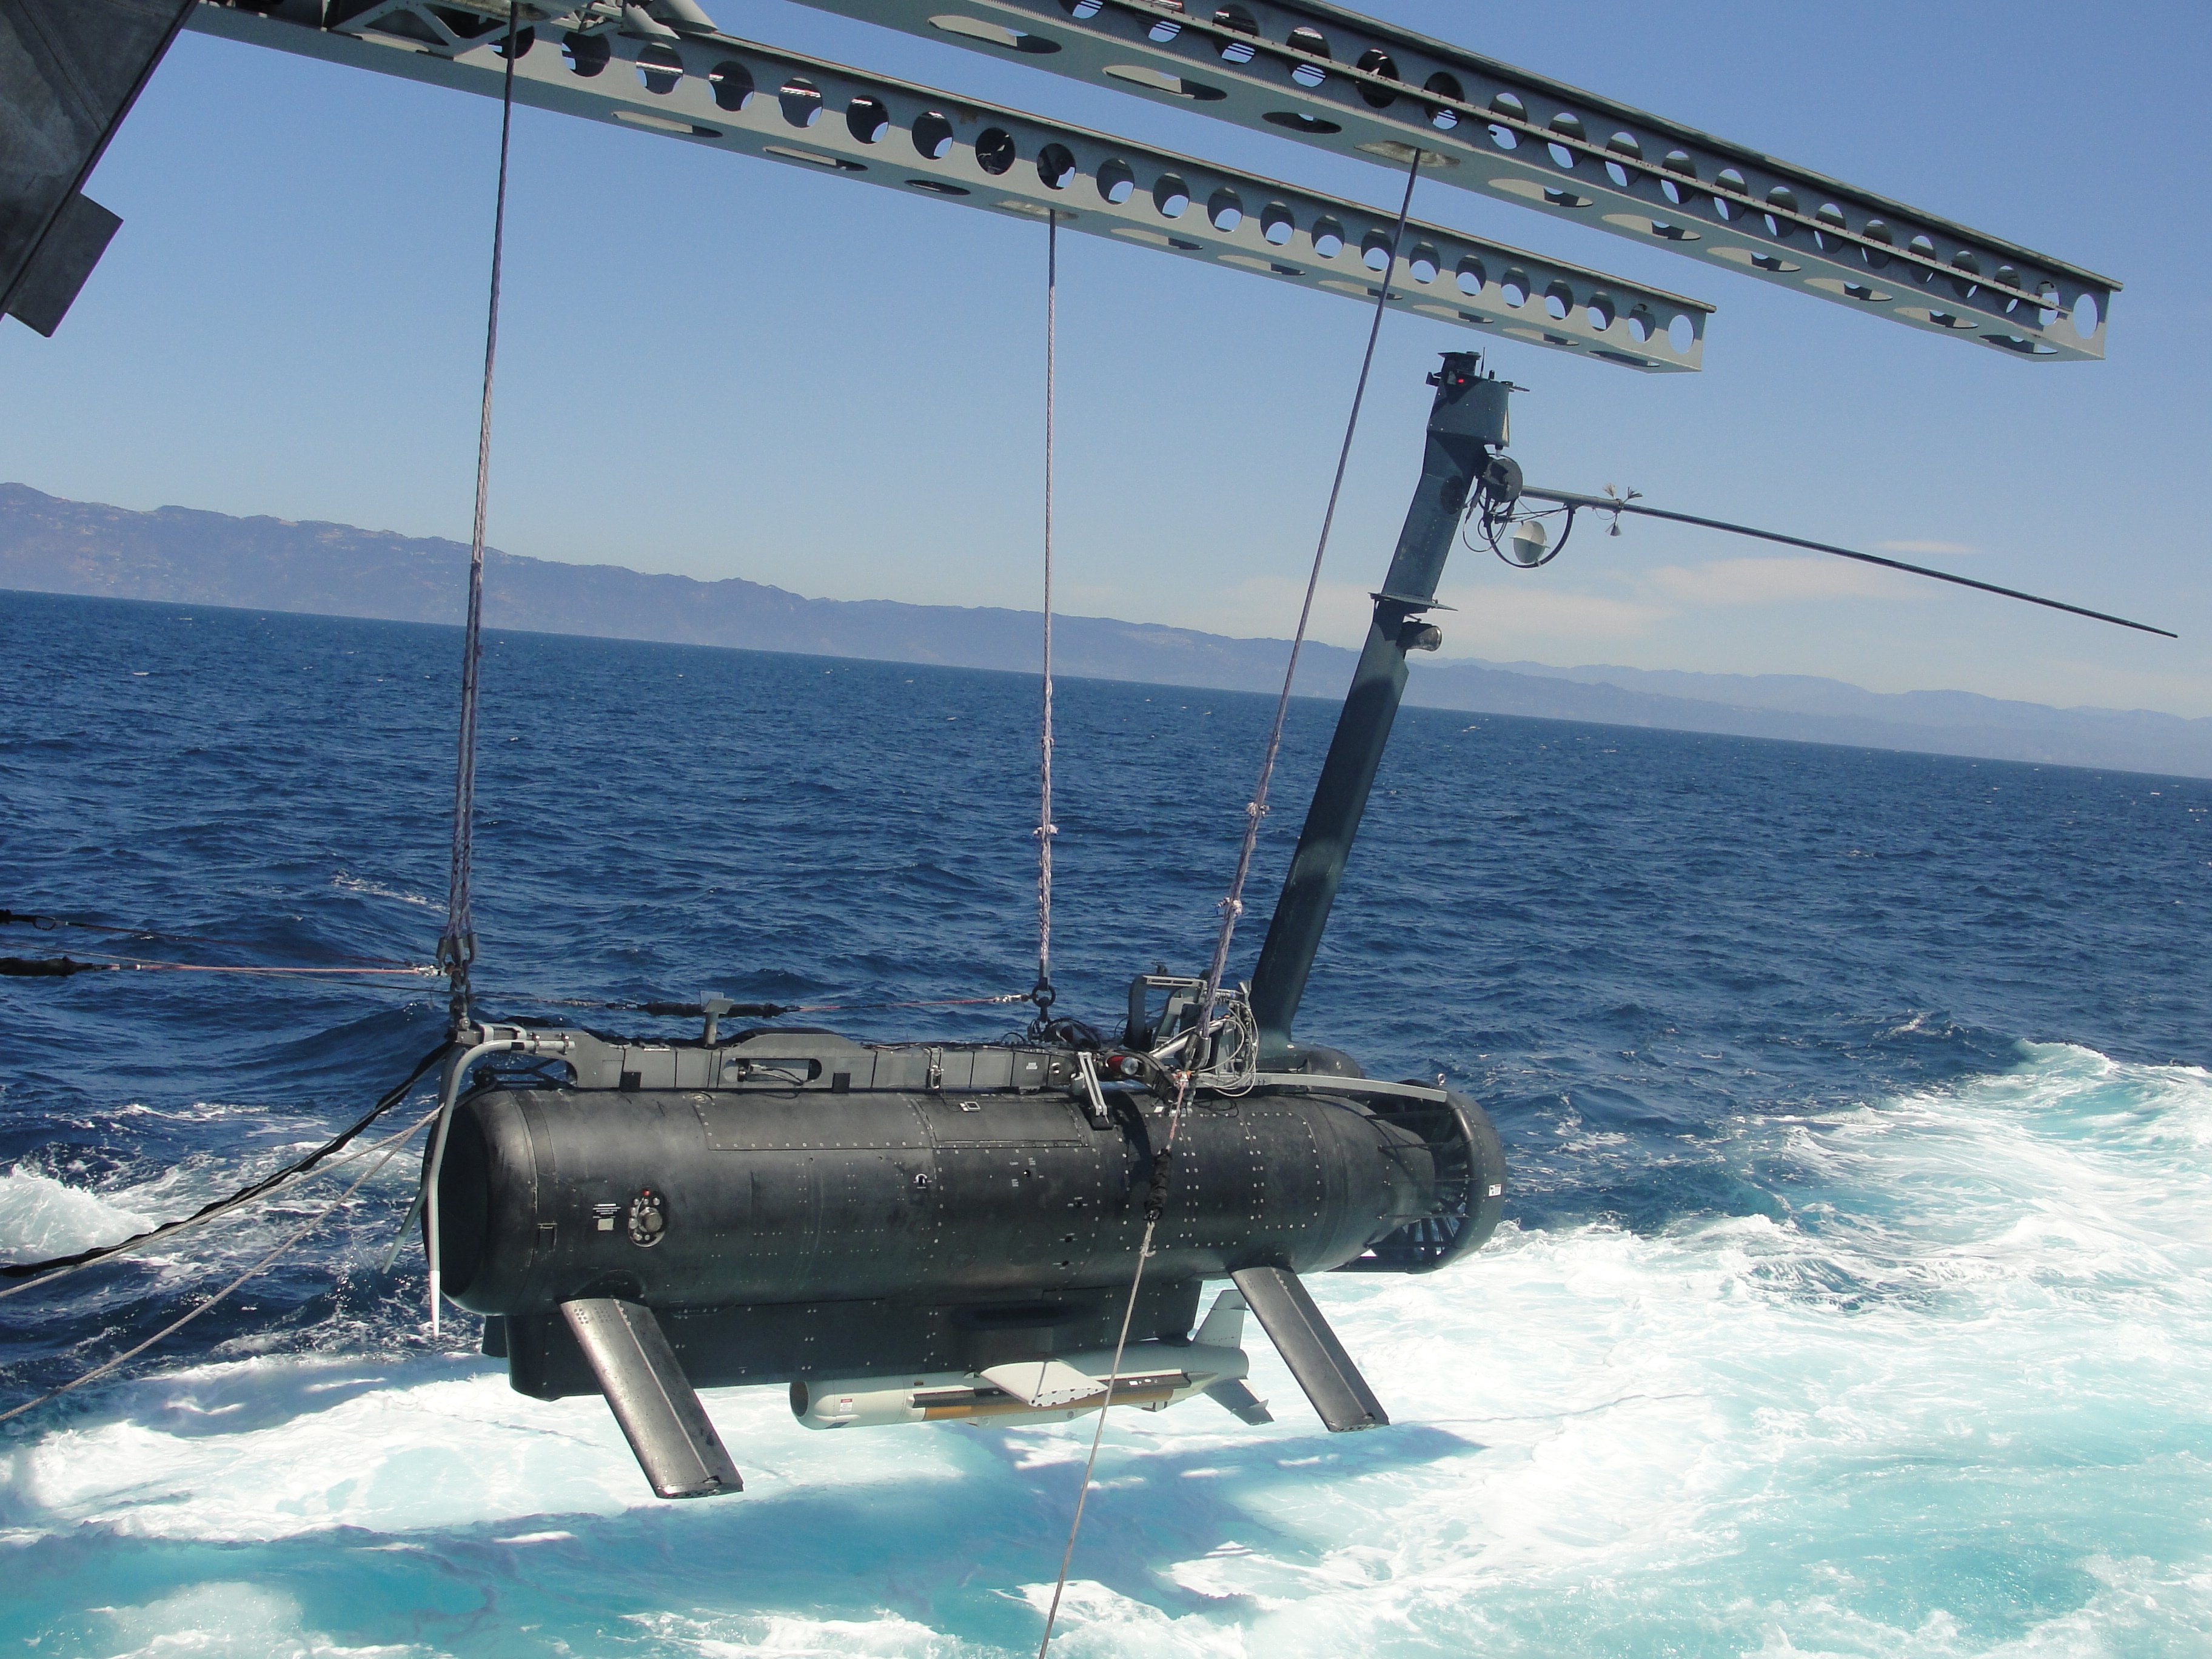 The littoral combat ship USS Independence (LCS-2) deploys a remote multi-mission vehicle (RMMV) while testing the ship's mine countermeasures mission package (MCM) off the southern California coast in August 2013. Austal USA photo. 